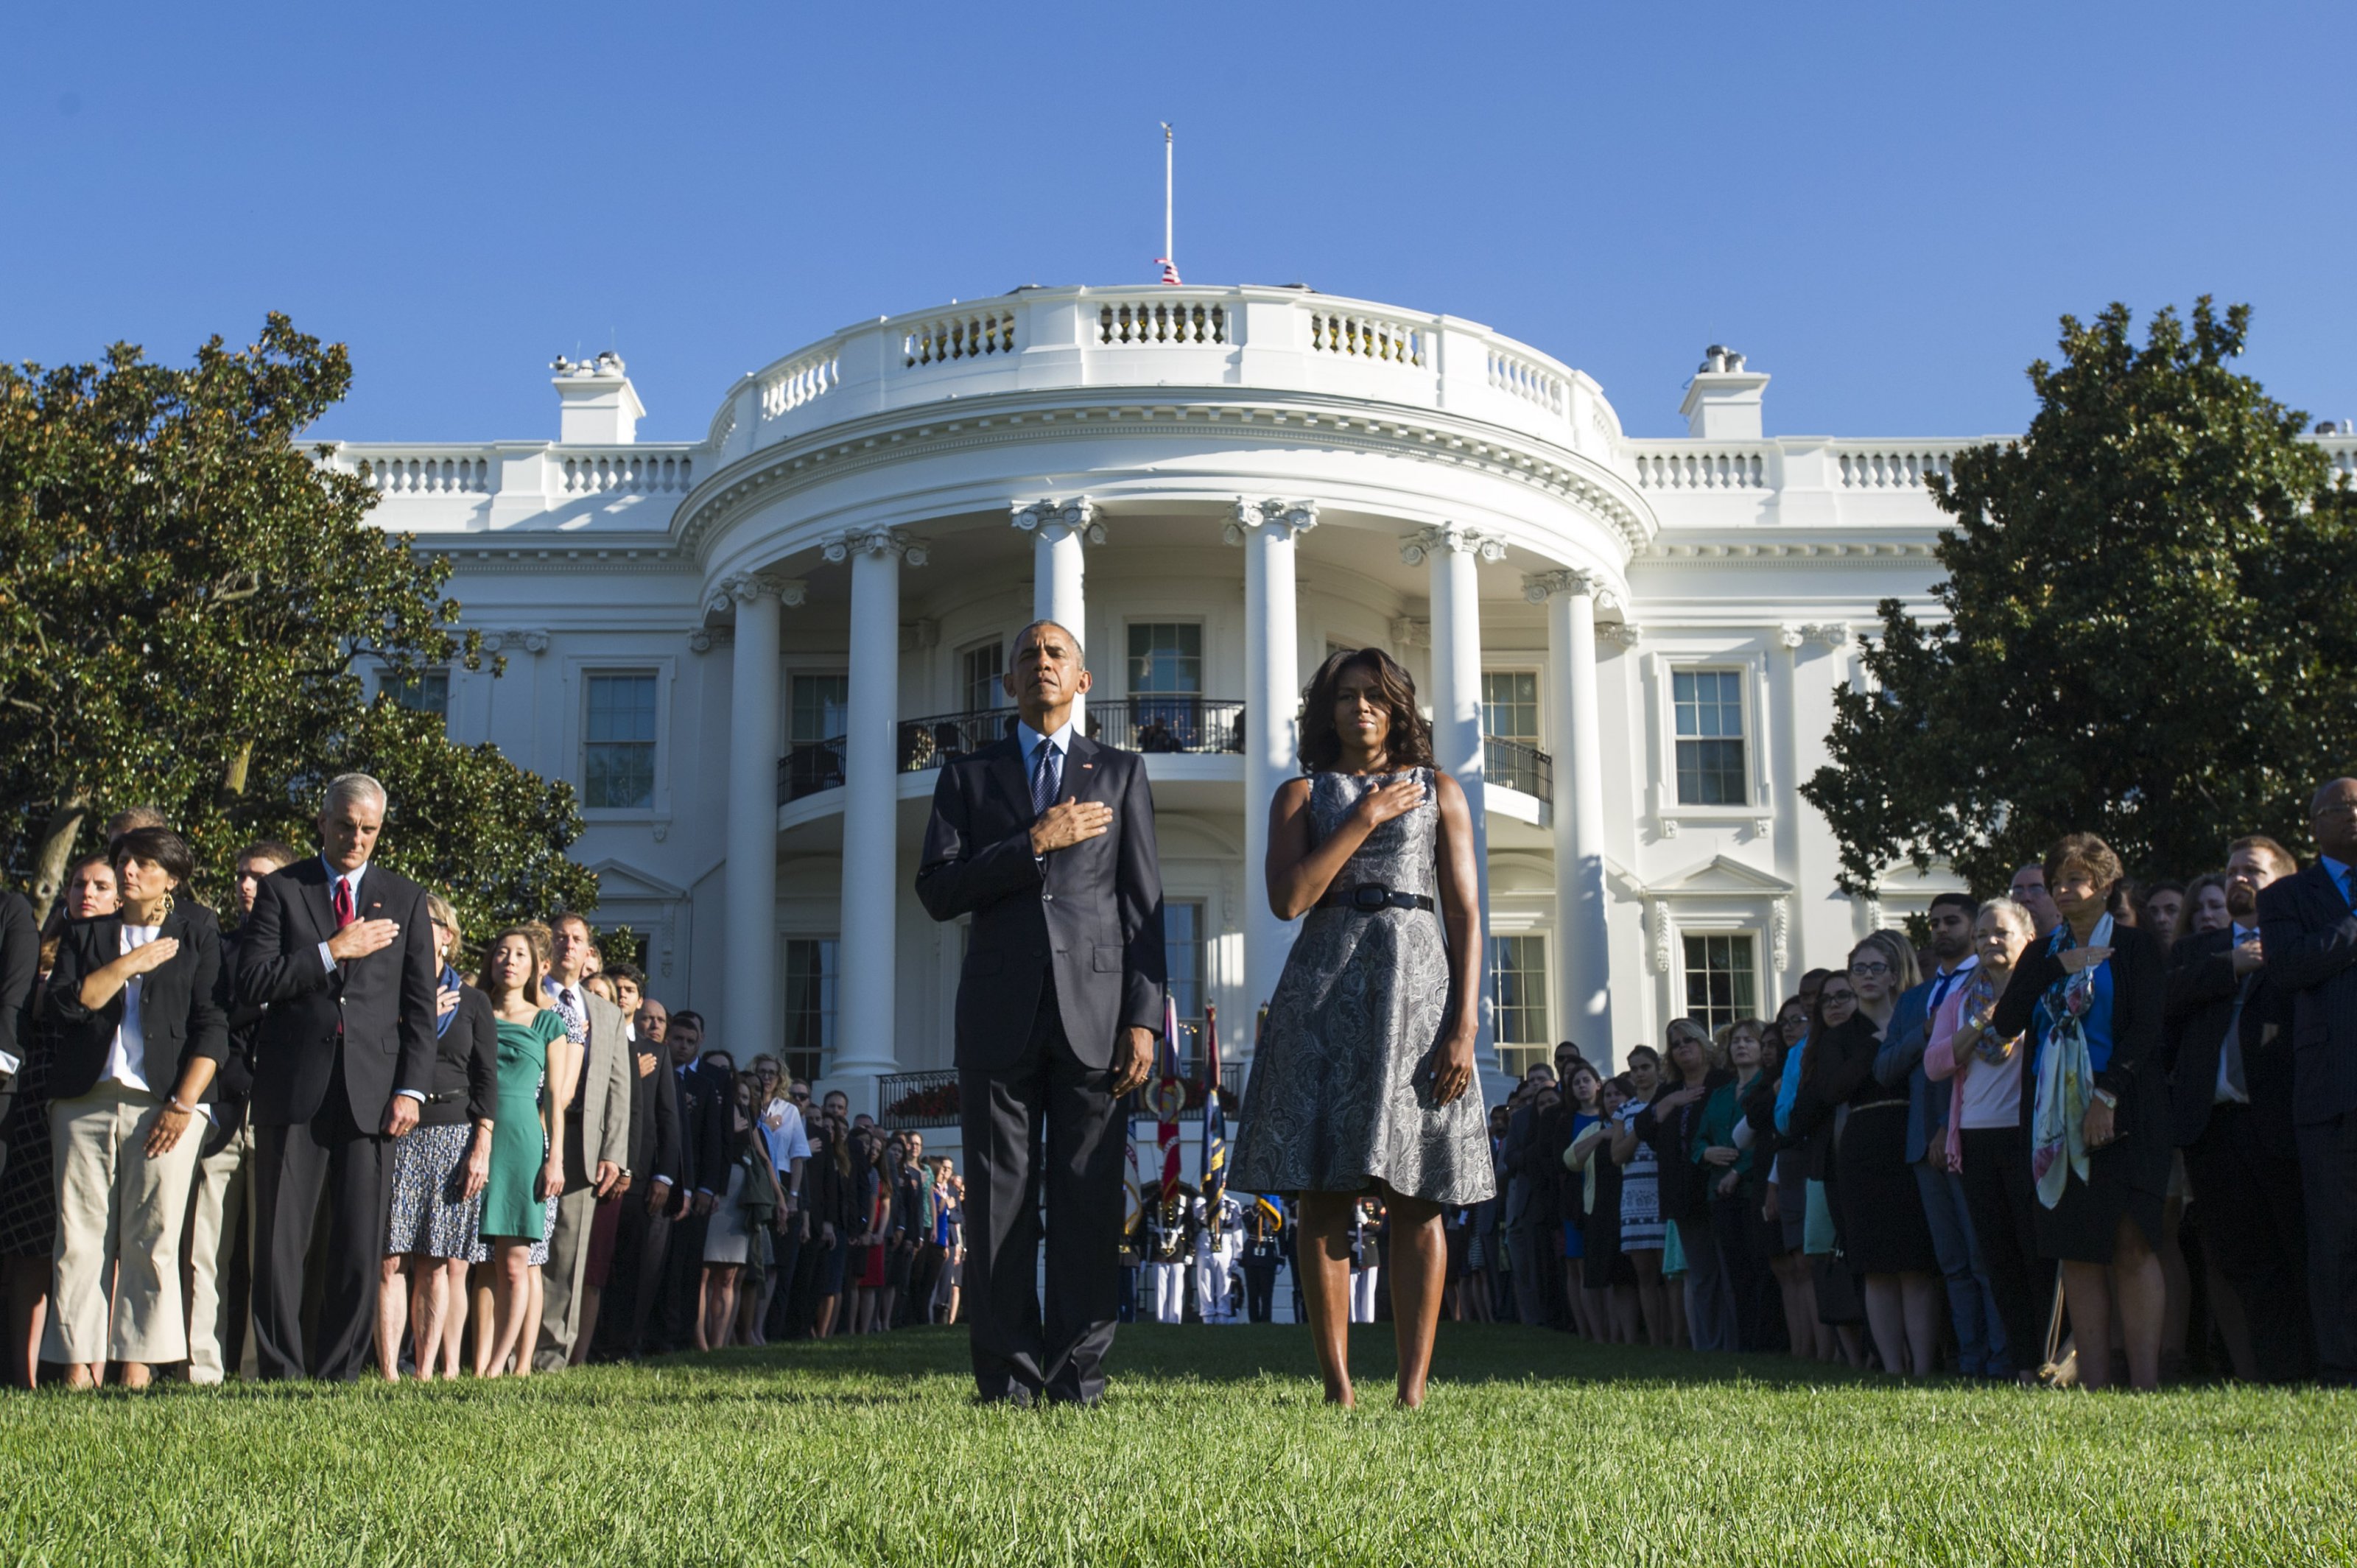 President Barack Obama and First Lady Michelle Obama, joined by White House staff, stand as Taps is played on the 14th anniversary of the September 11 terrorist attacks on the United States, at the White House in Washington, D.C. on September 11, 2015. Photo by Kevin Dietsch/UPI/ABACAPRESS.COM